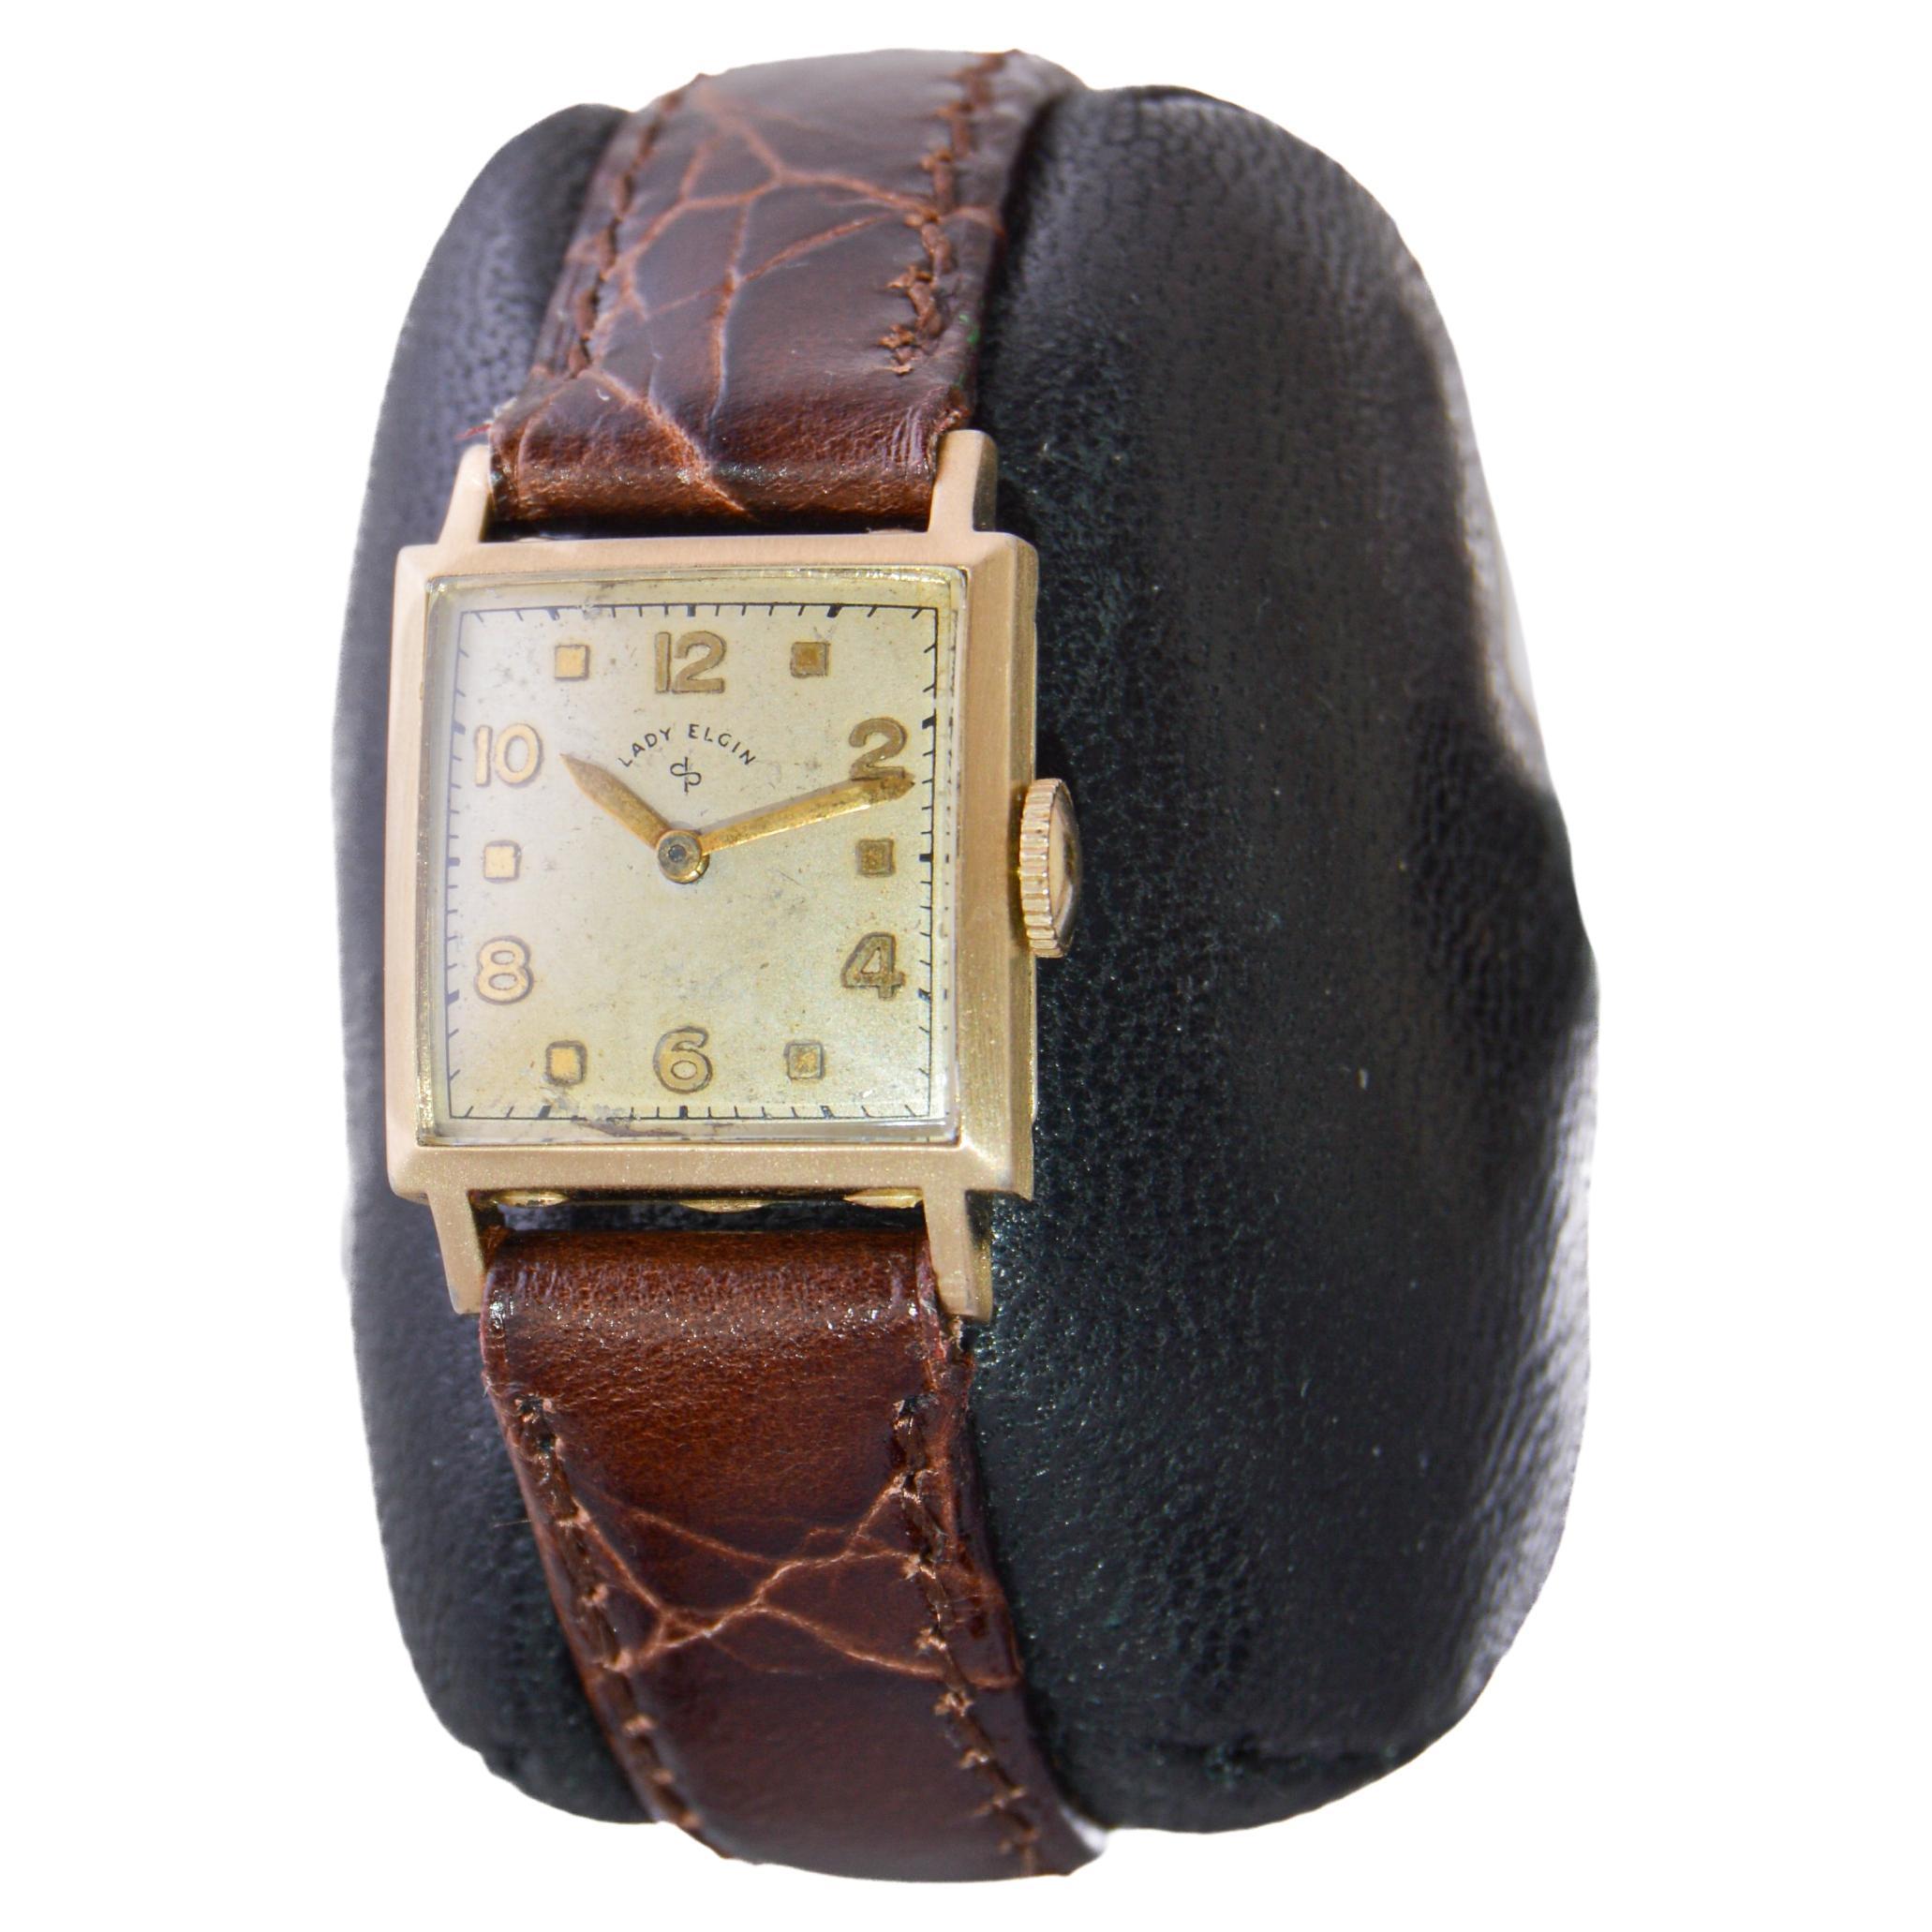 Lady Elgin Gold-Filled Art Deco Tank Watch with Original Dial from 1940's For Sale